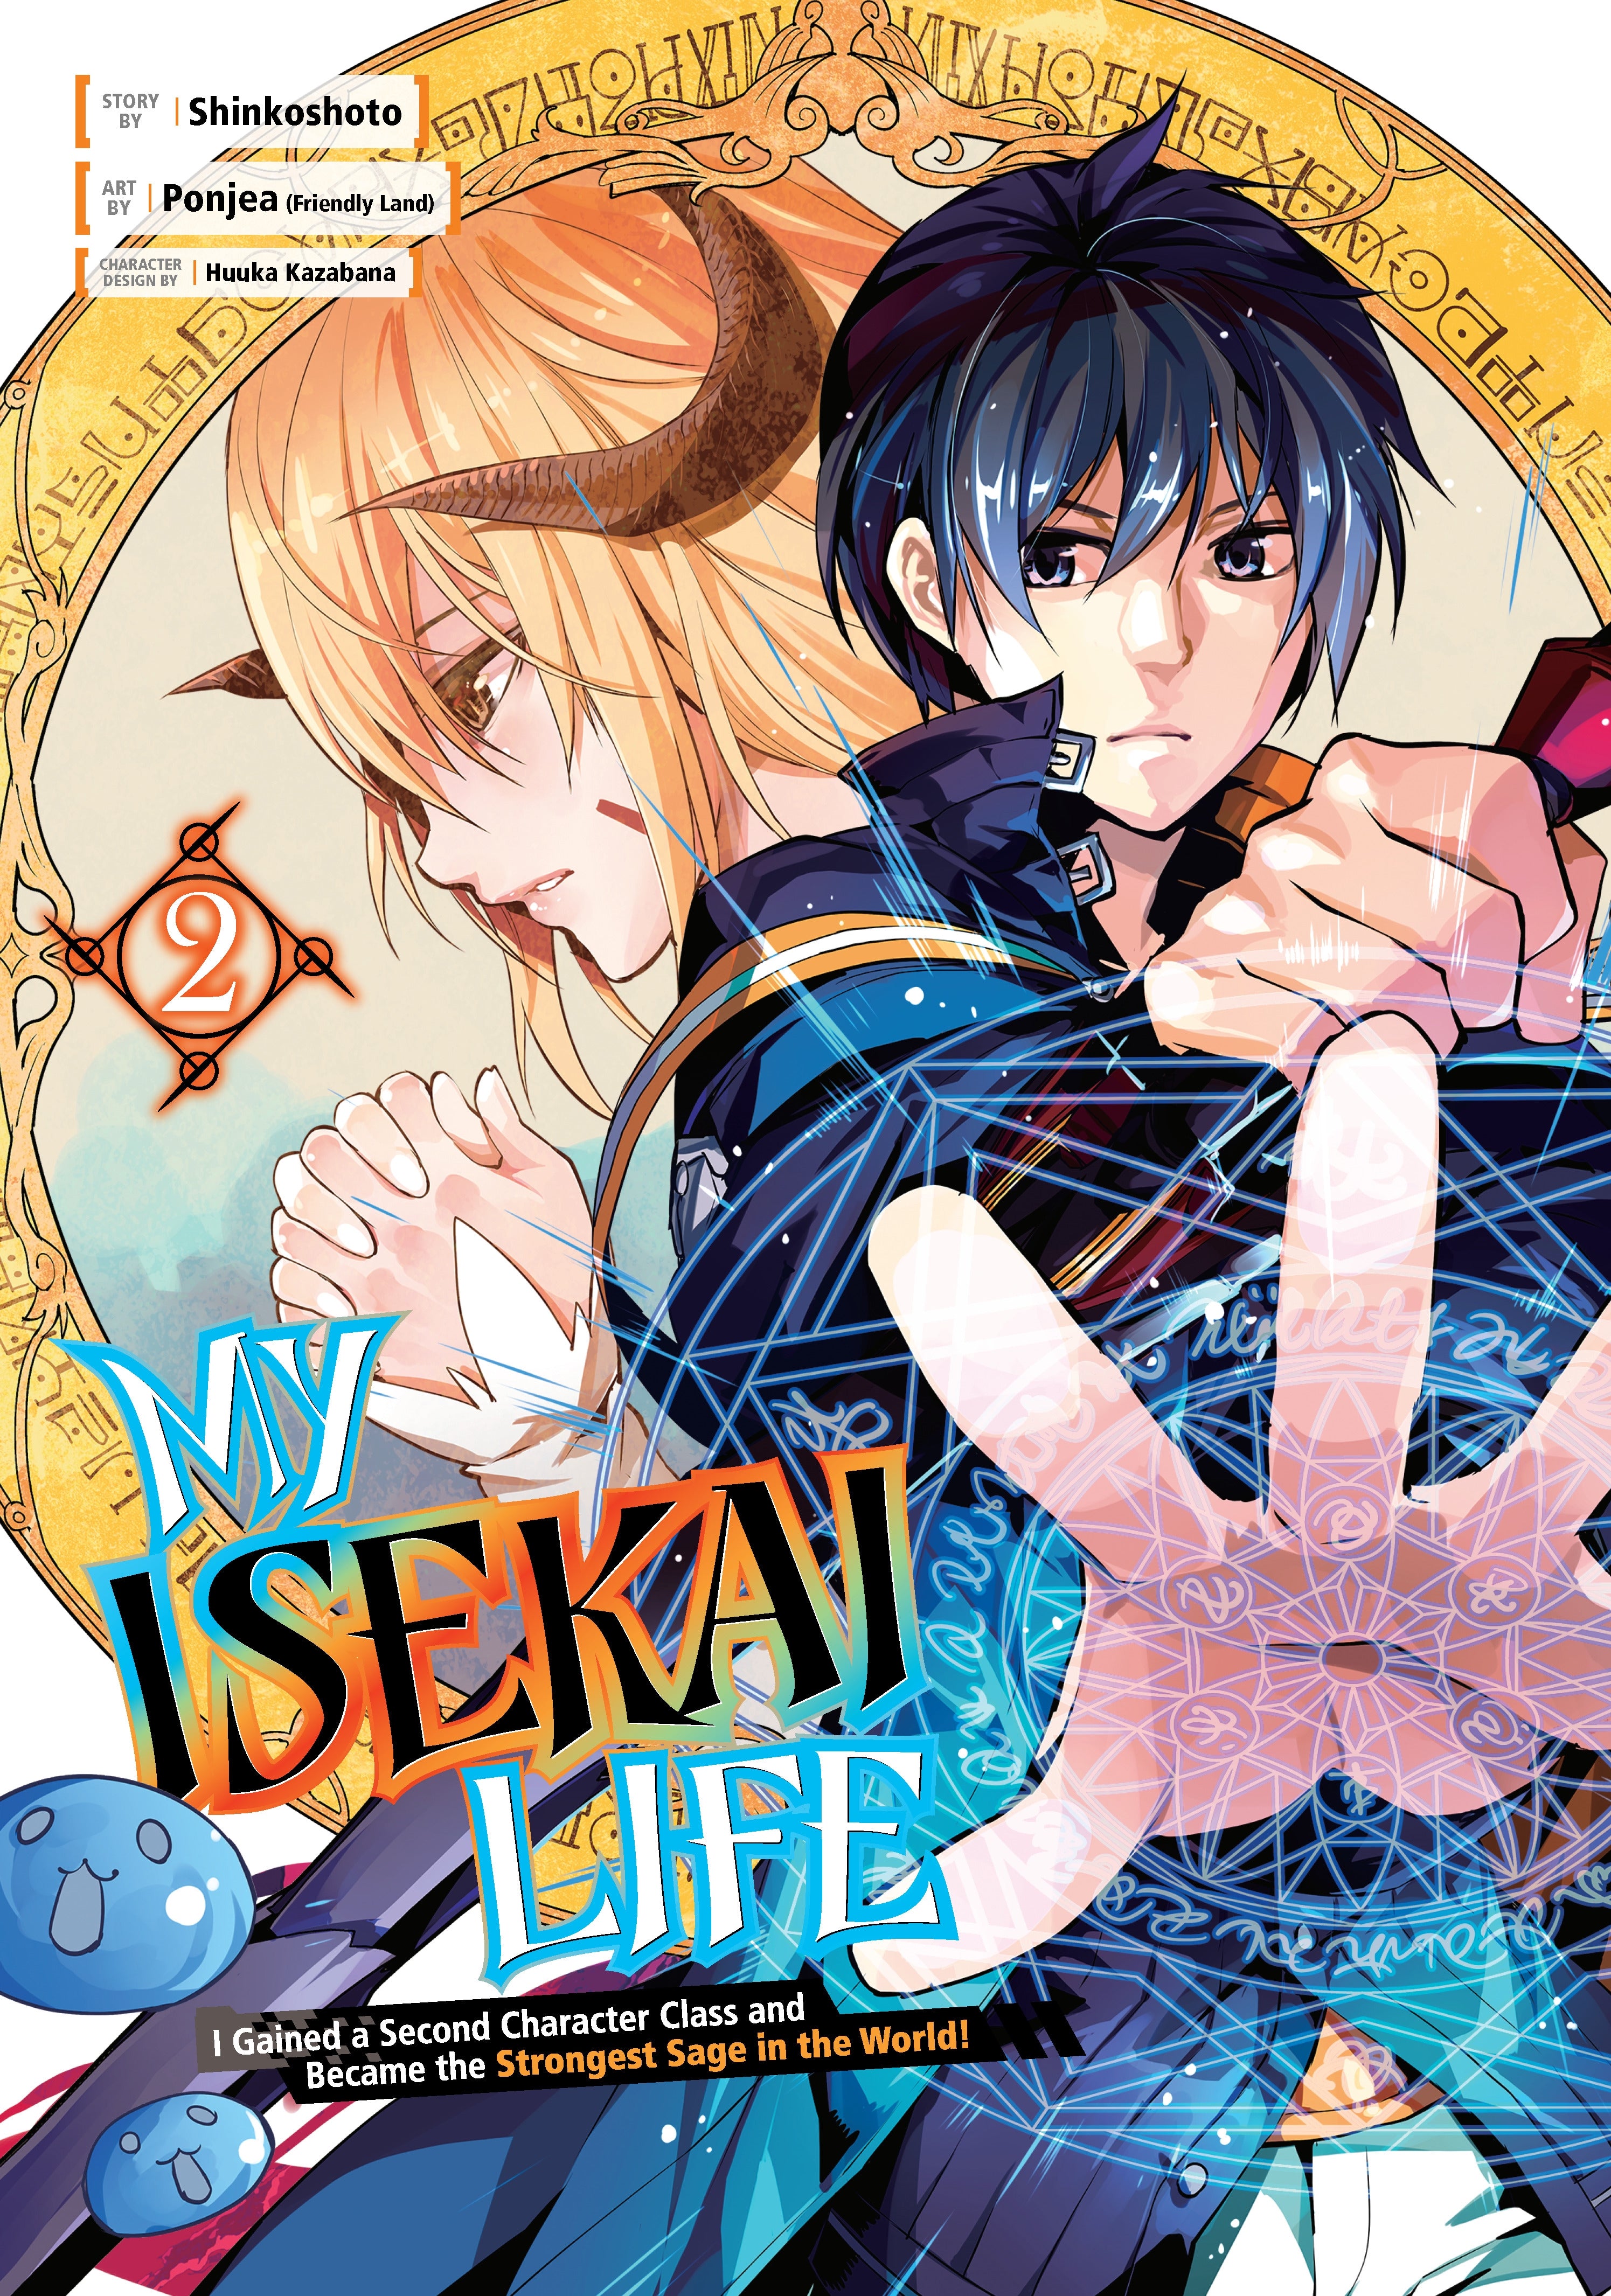 My Isekai Life - I Gained a Second Character Class and Became the Strongest Sage in the World! Vol. 2